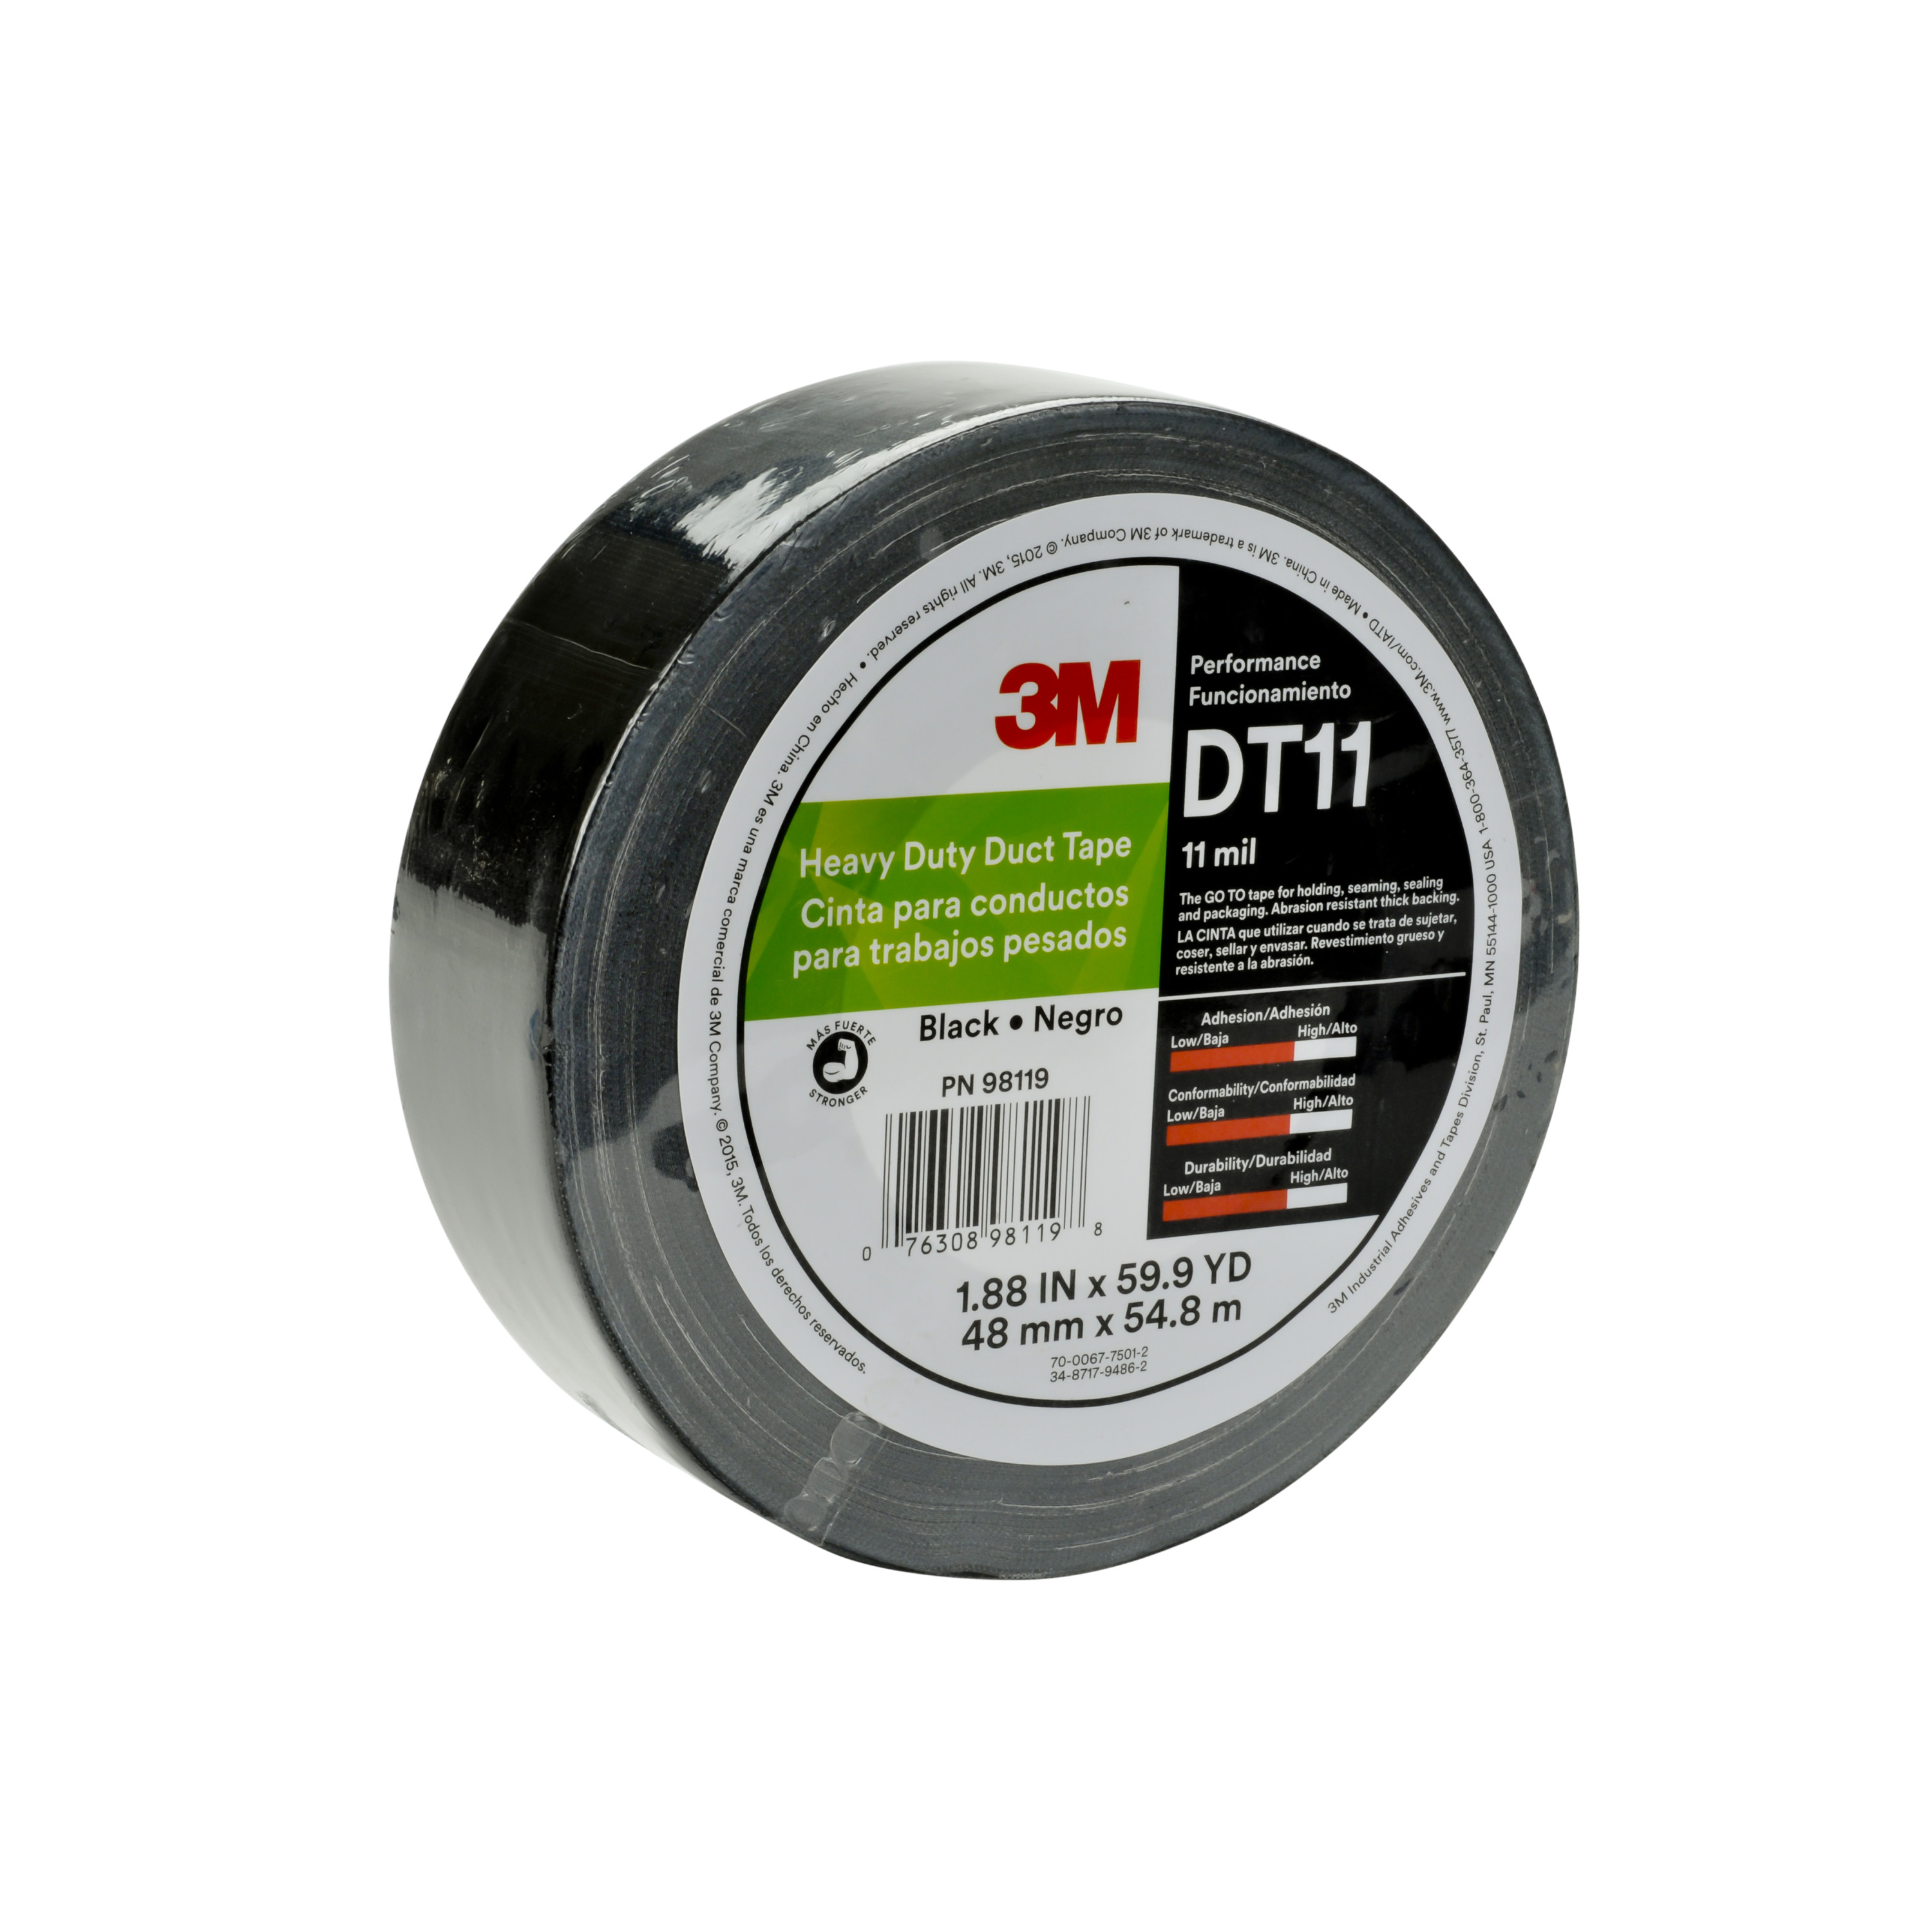 3M™ Heavy Duty Duct Tape DT11, Black, 48 mm x 54.8 m, 11 mil, 24 rolls
per case, Individually Wrapped Conviently Packaged